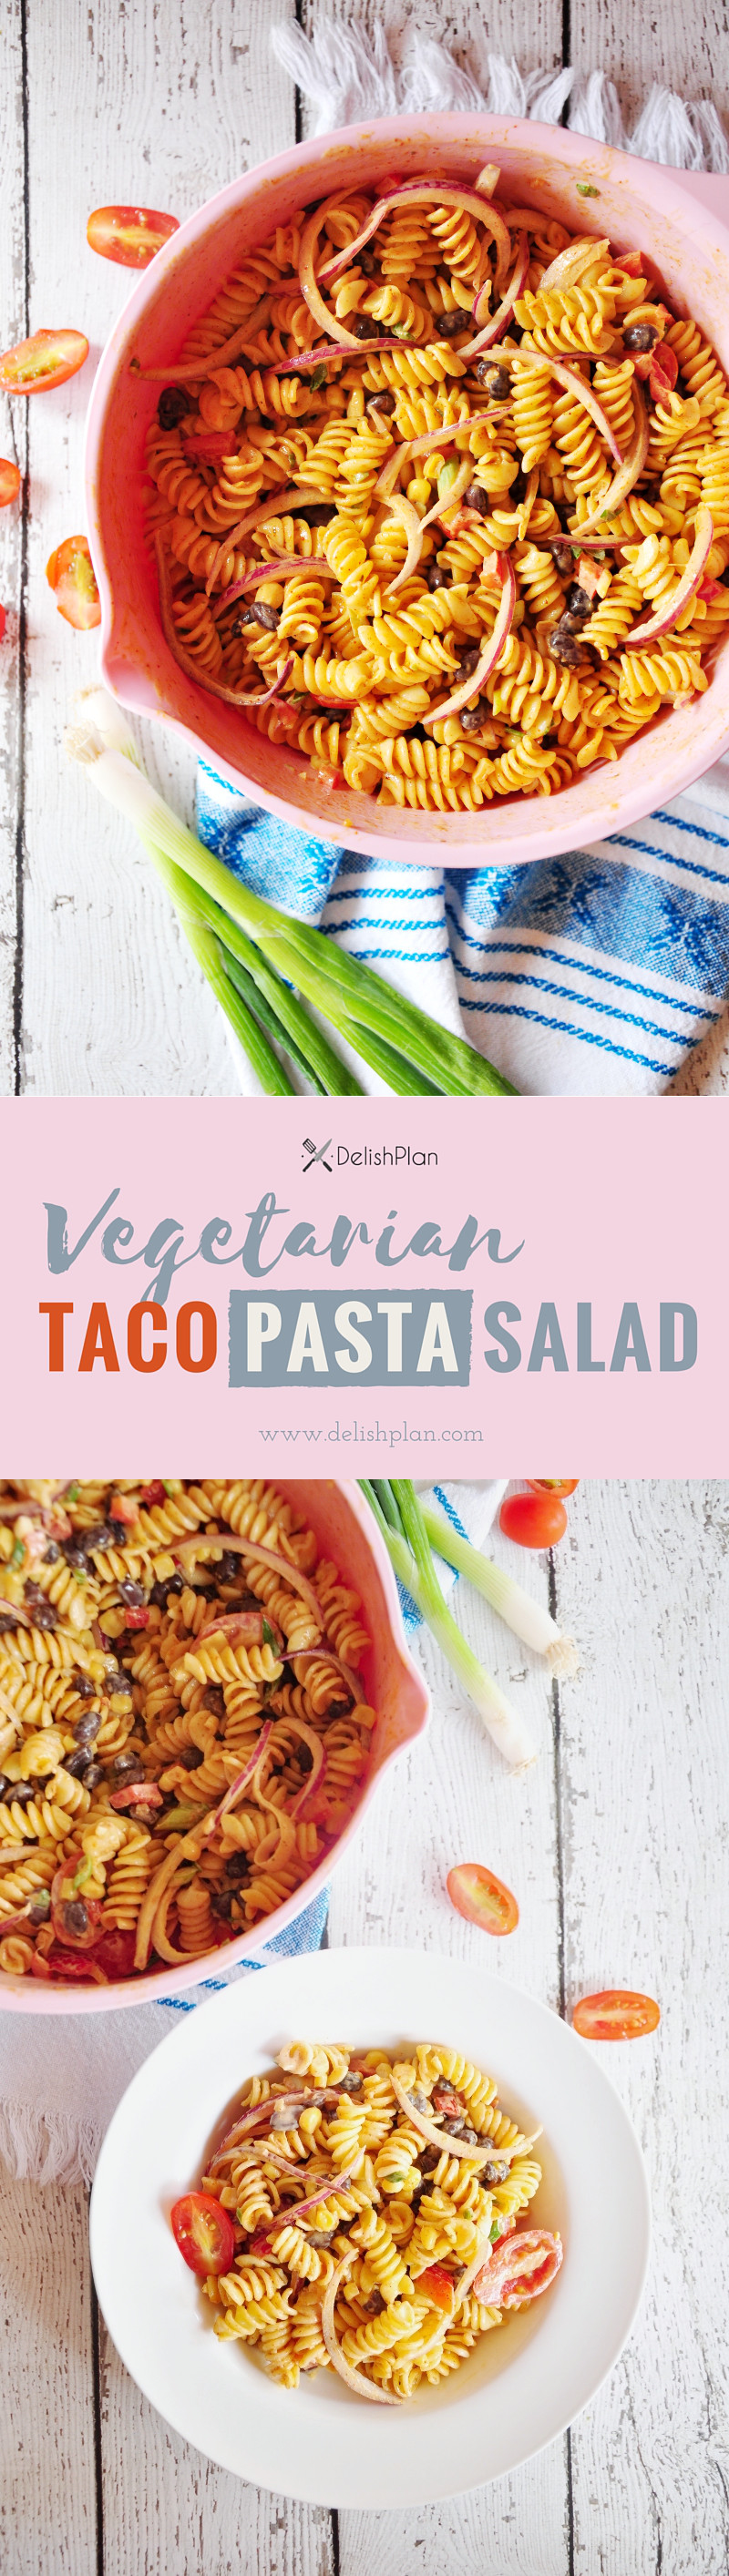 A delightful vegetarian pasta salad packed with flavor, fresh vegetables, and beans. The longer the chill time is, the better it tastes.